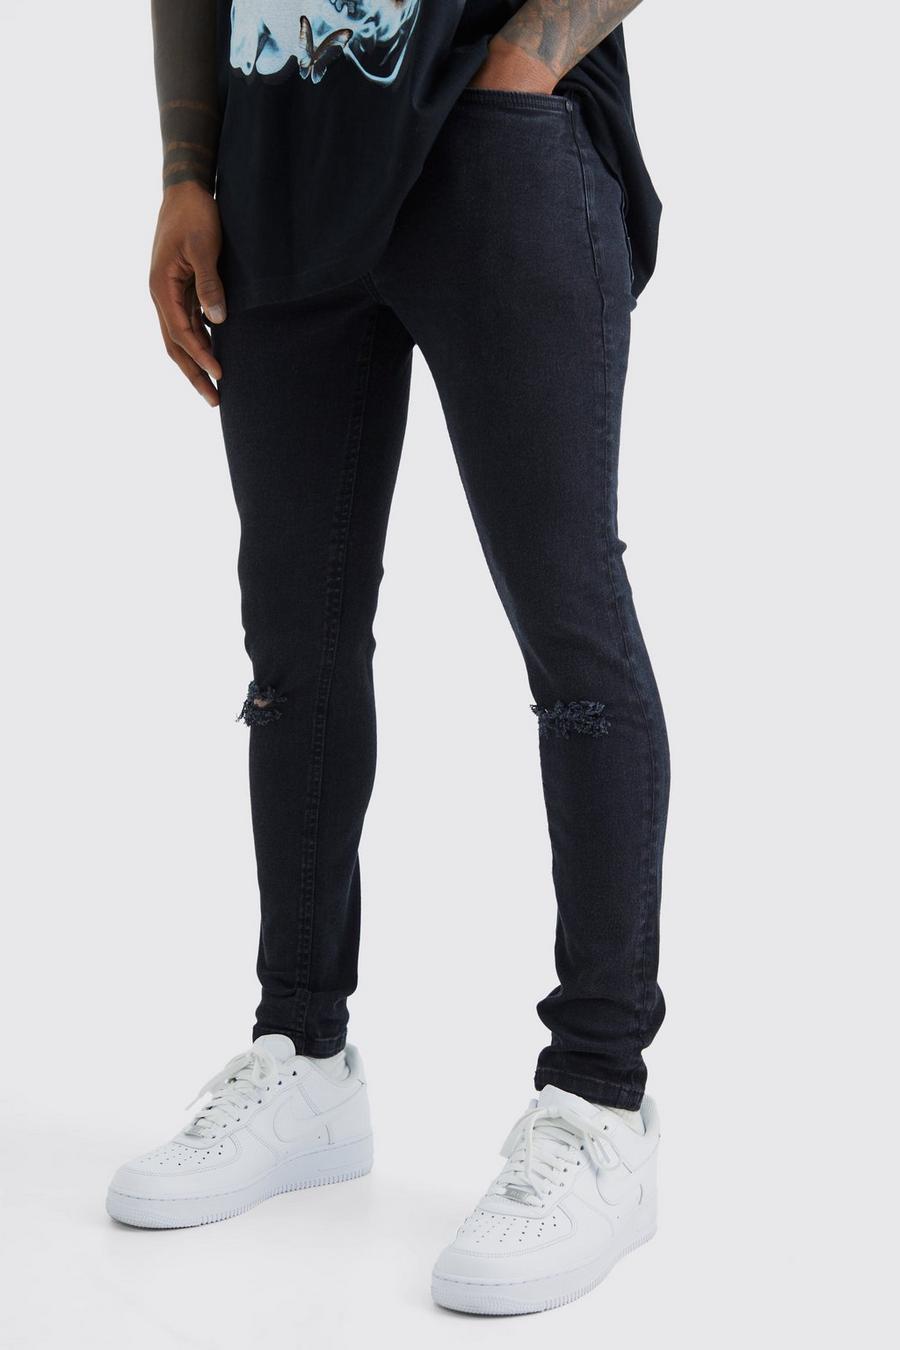 Washed black Super Skinny Stretch Ripped Knee Jeans